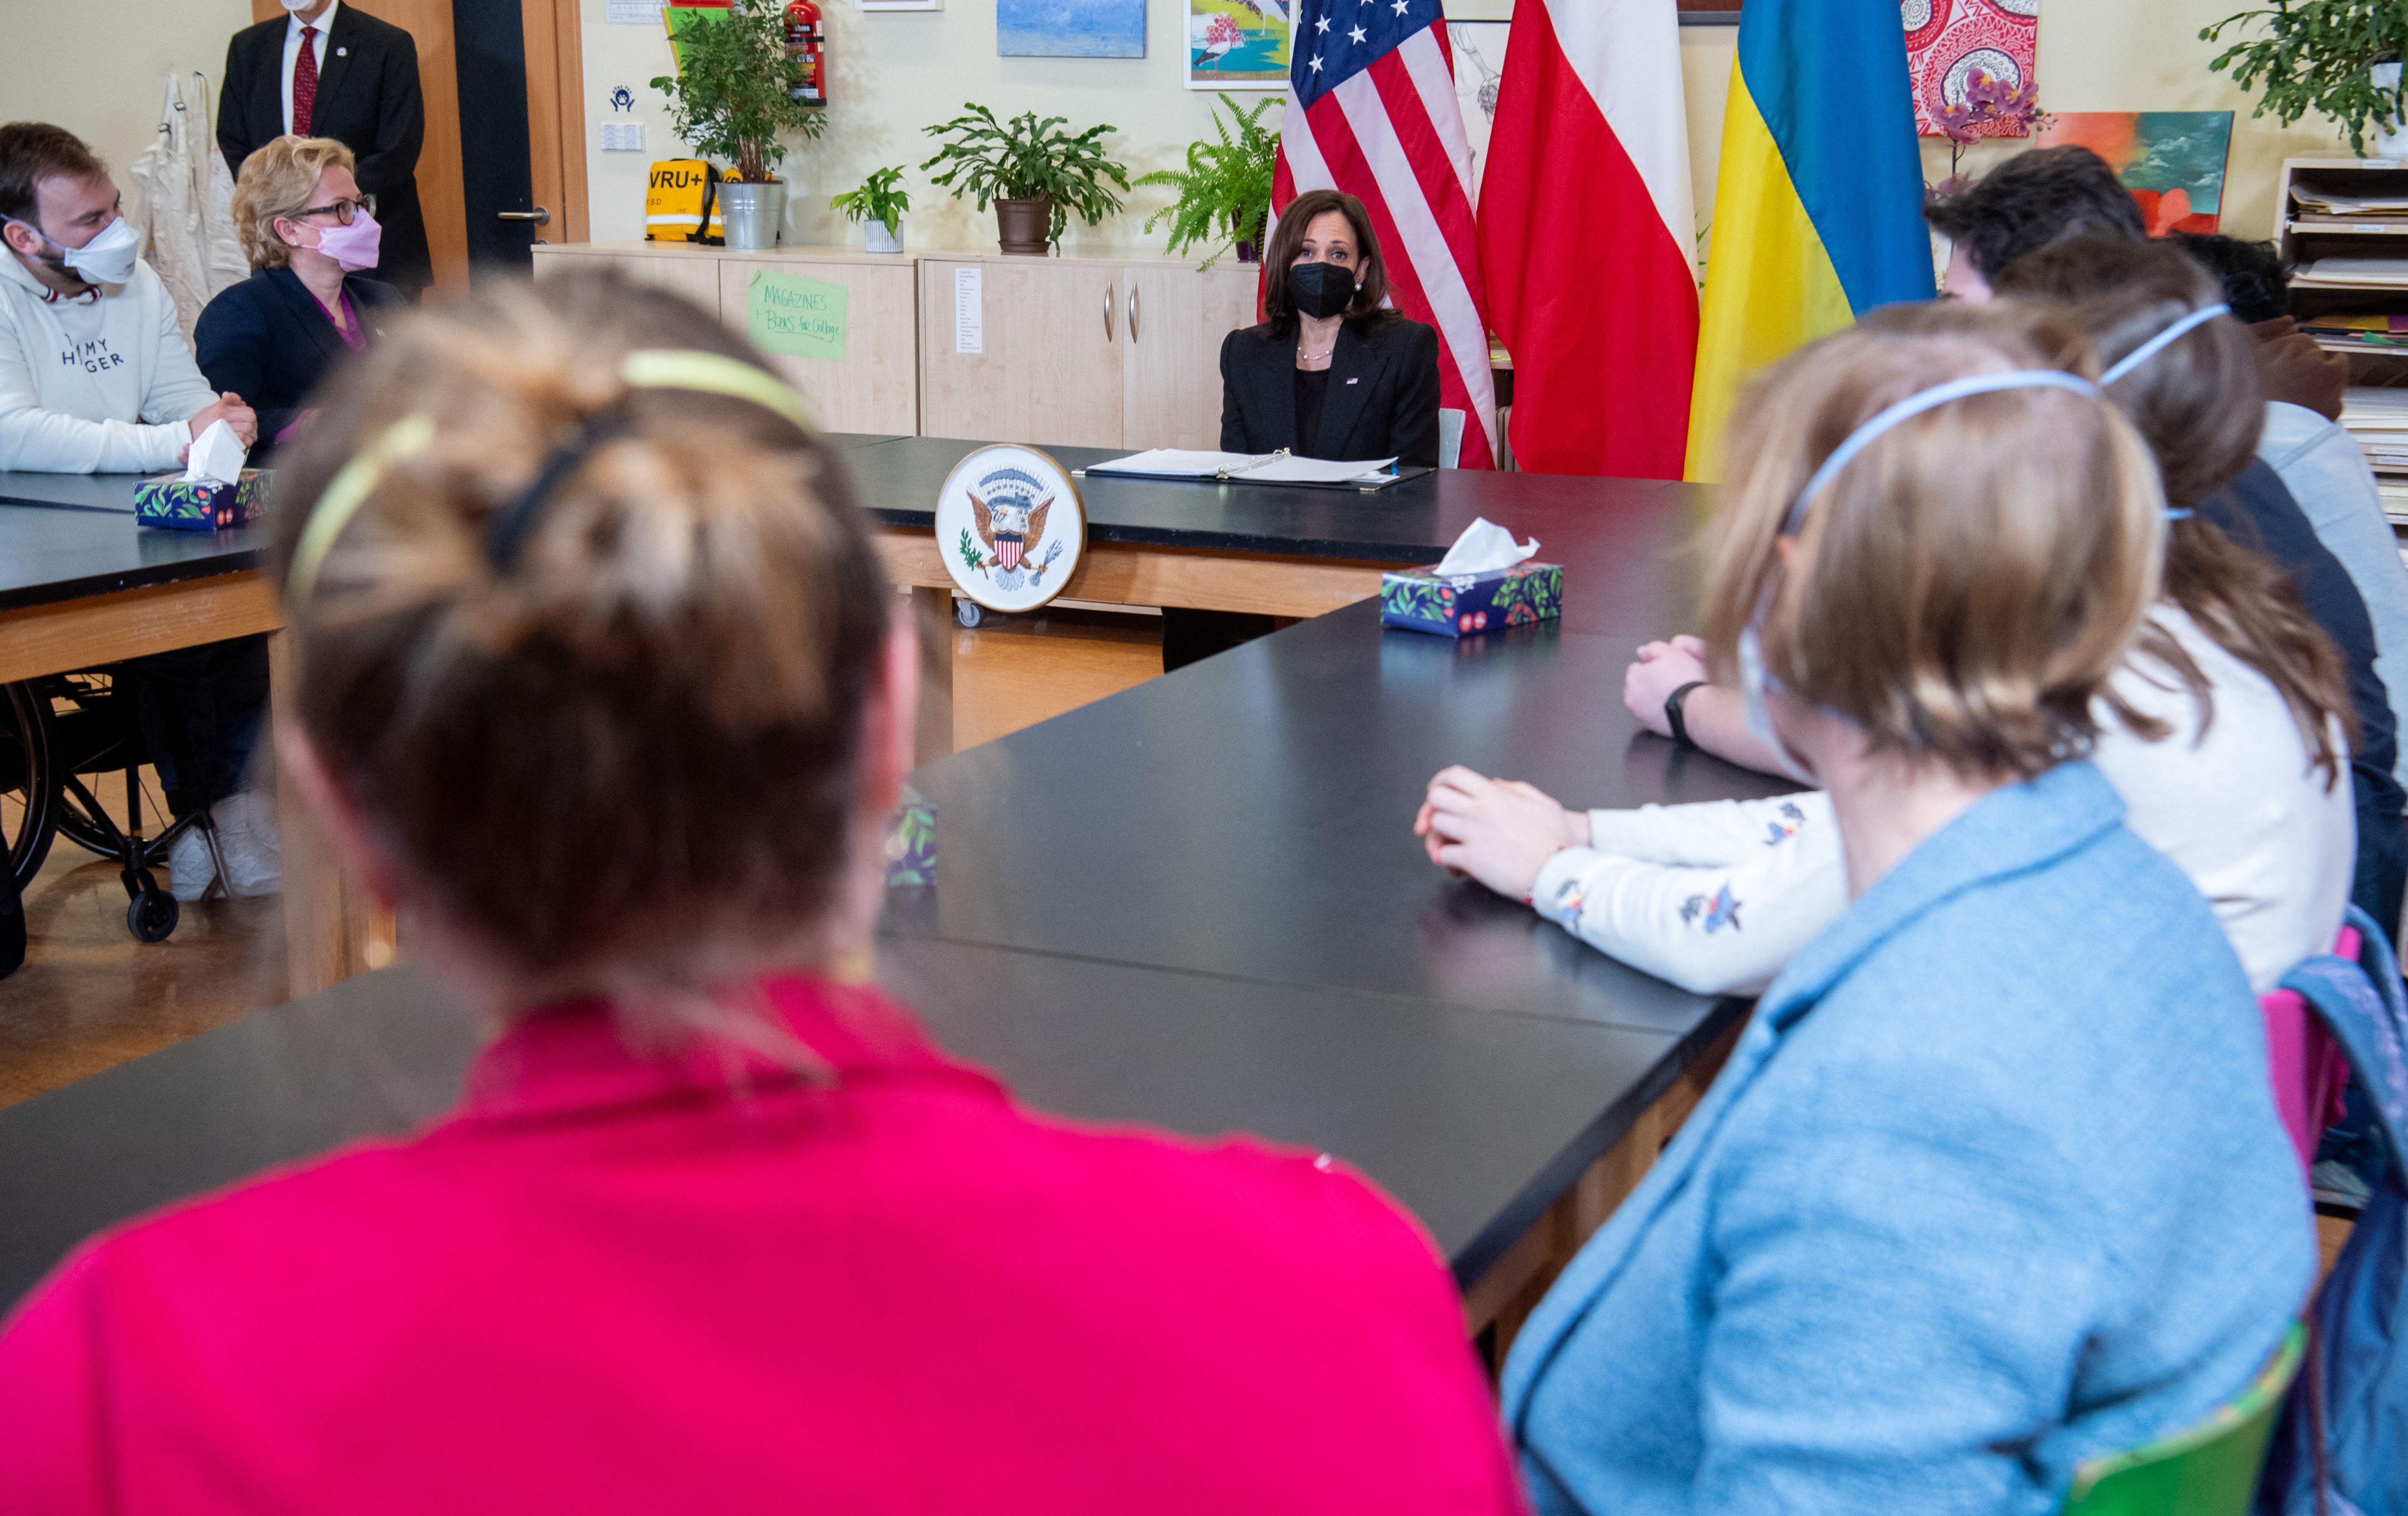 US Vice President Kamala Harris (C) holds a roundtable discussion with people displaced from Ukraine at the American School of Warsaw in Warsaw, Poland on March 10.